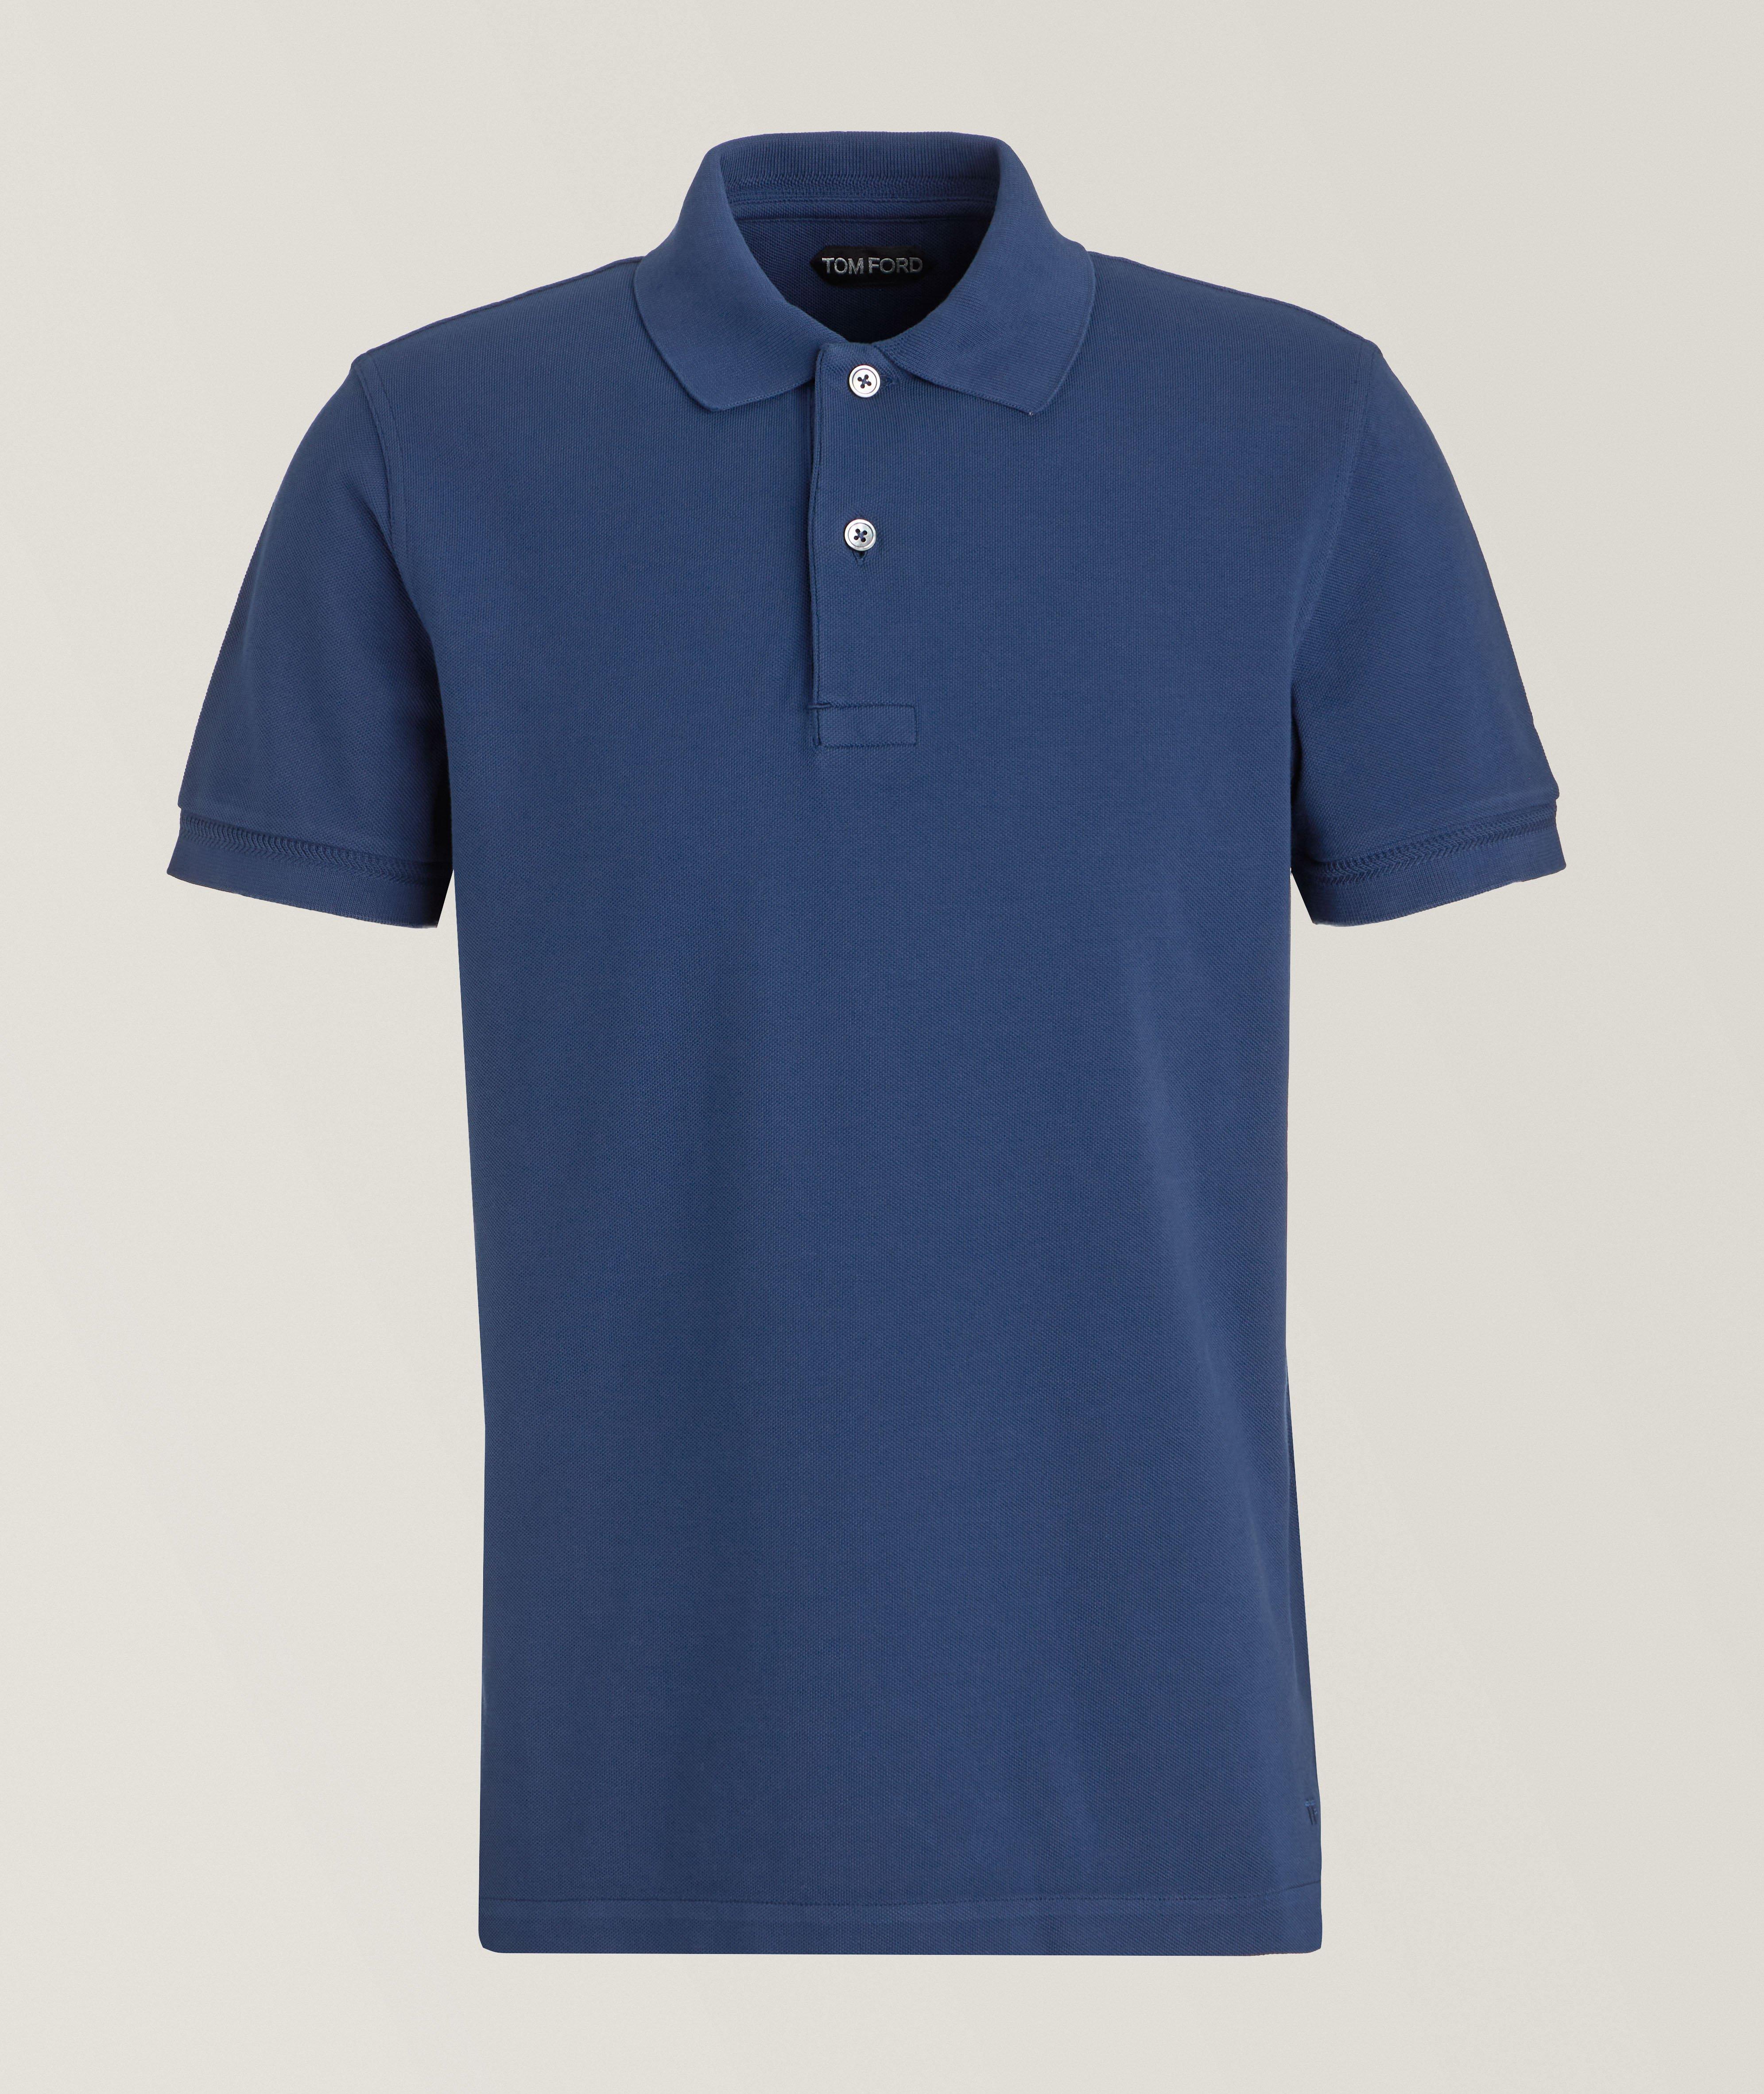 Regular-Fit Cotton Polo image 0